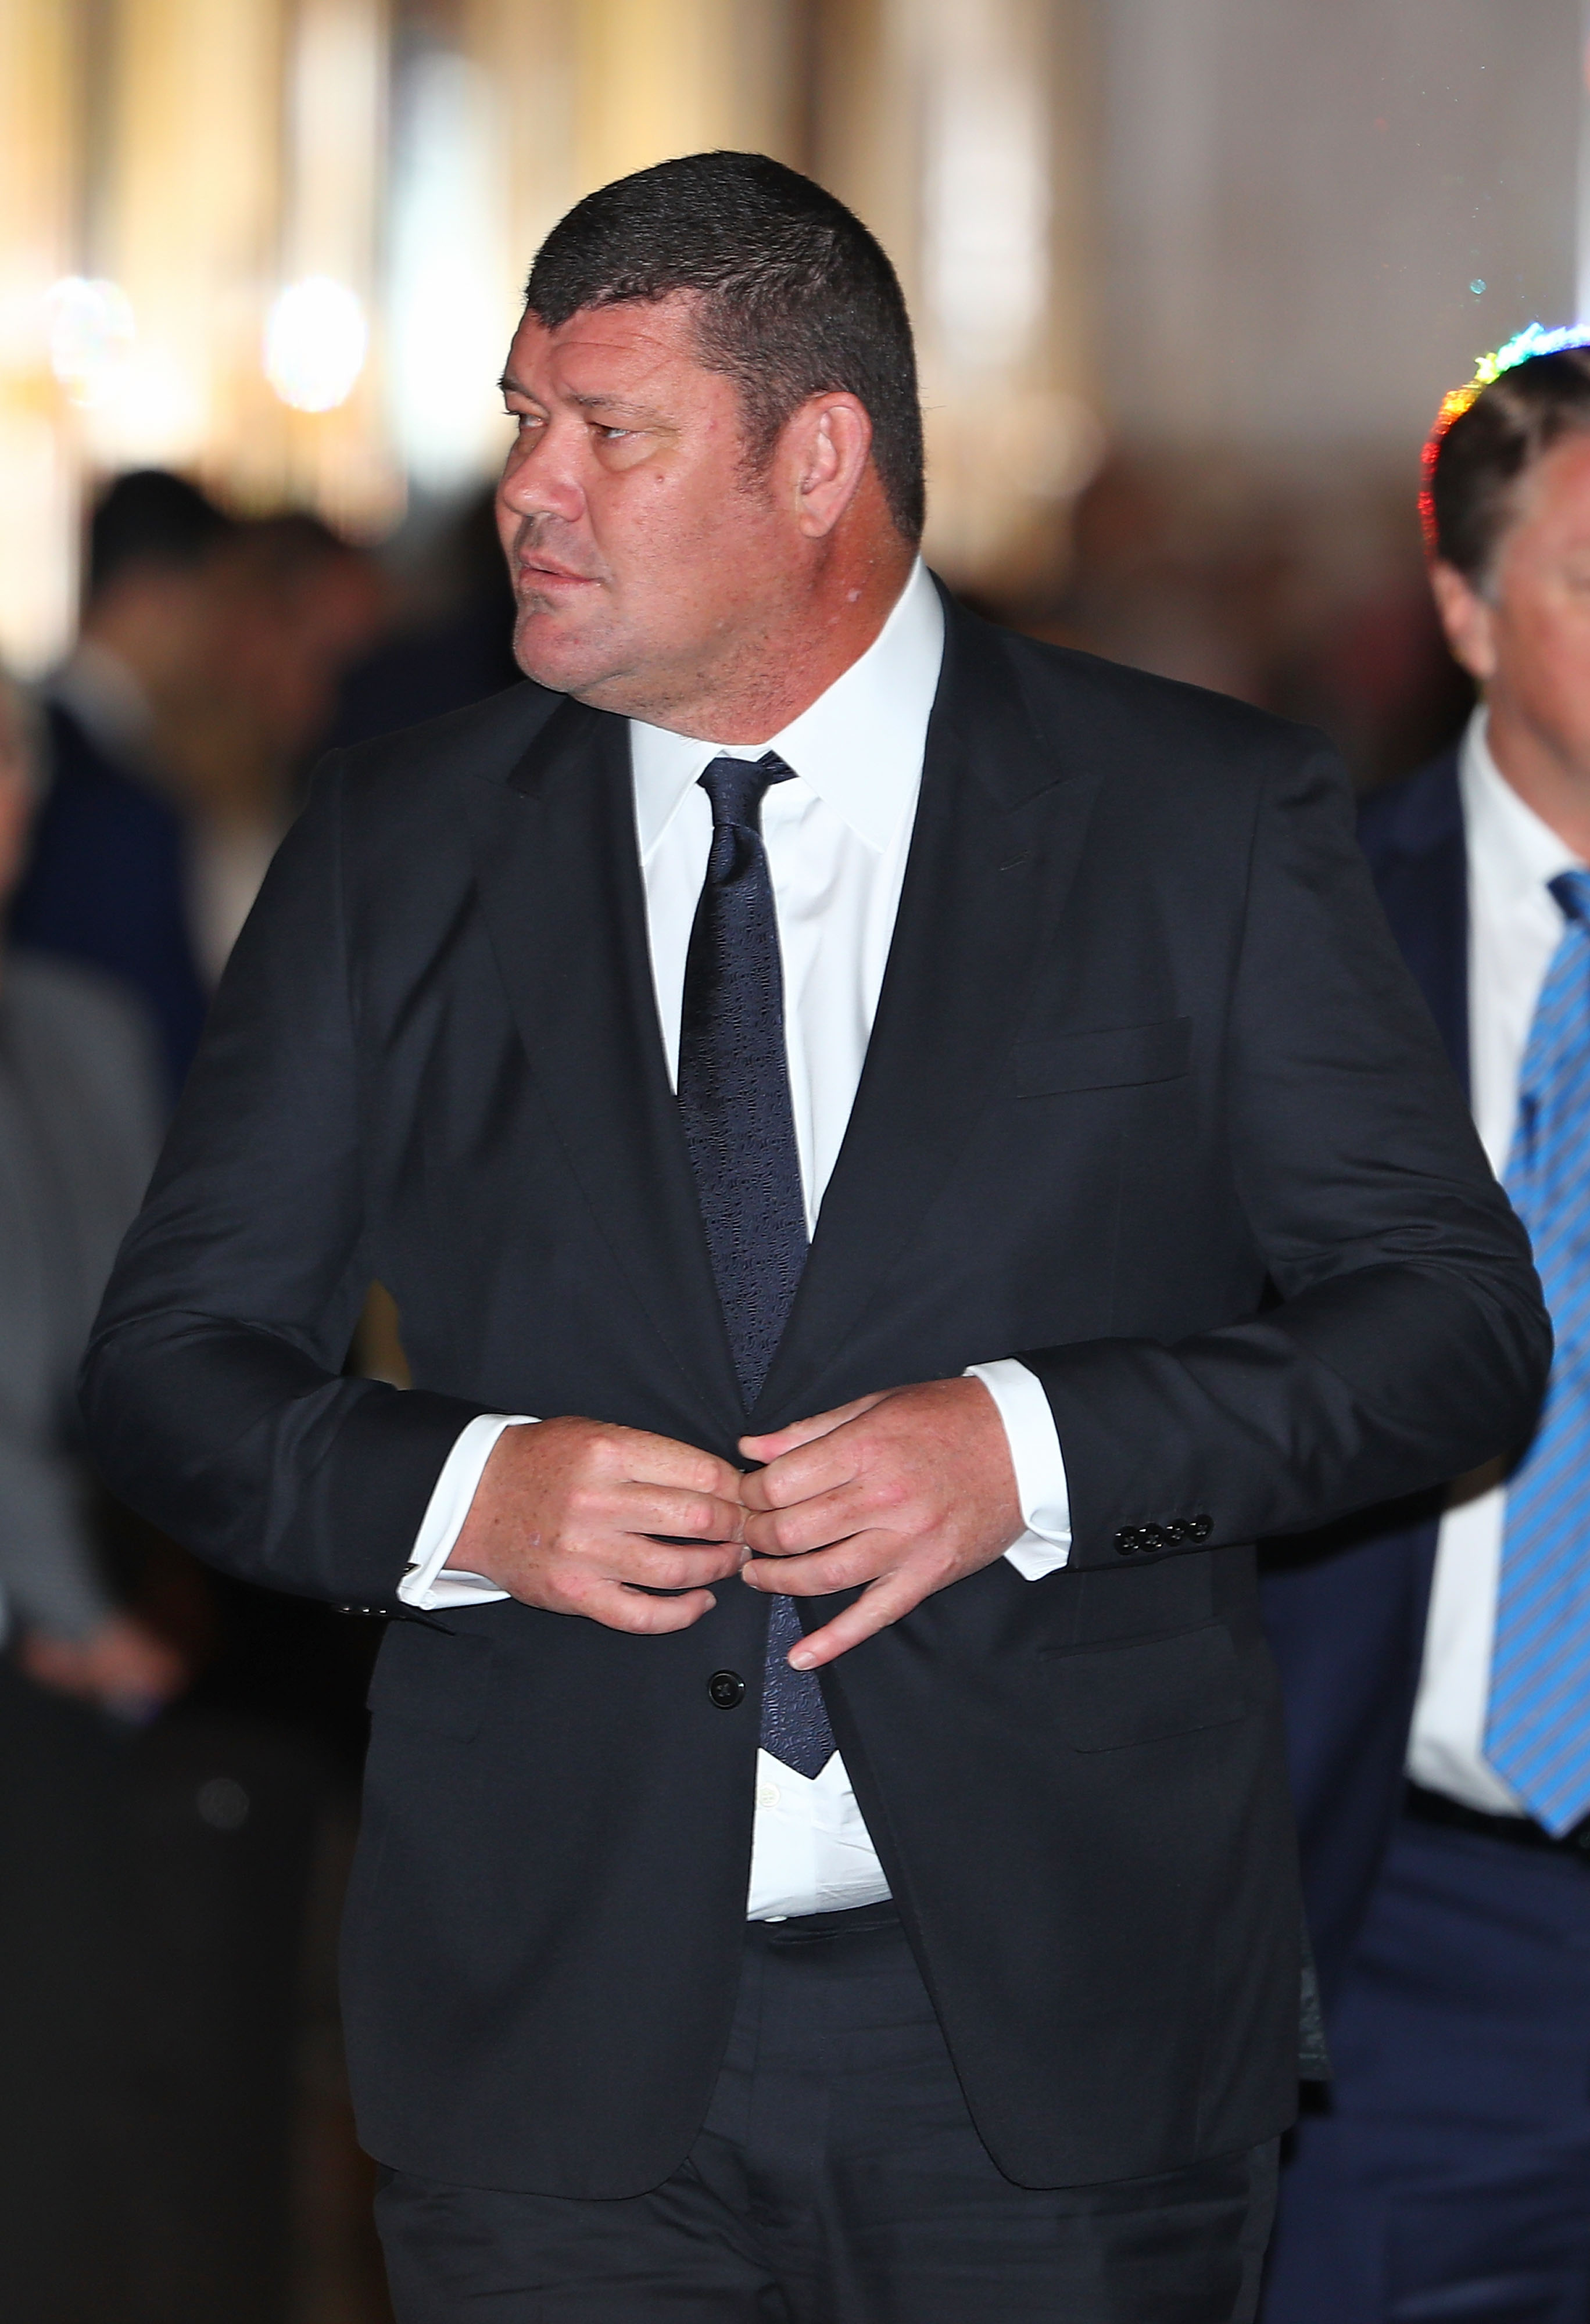 James Packer at the Crown Resorts annual general meeting on October 26, 2017 in Melbourne, Australia | Source: Getty Images